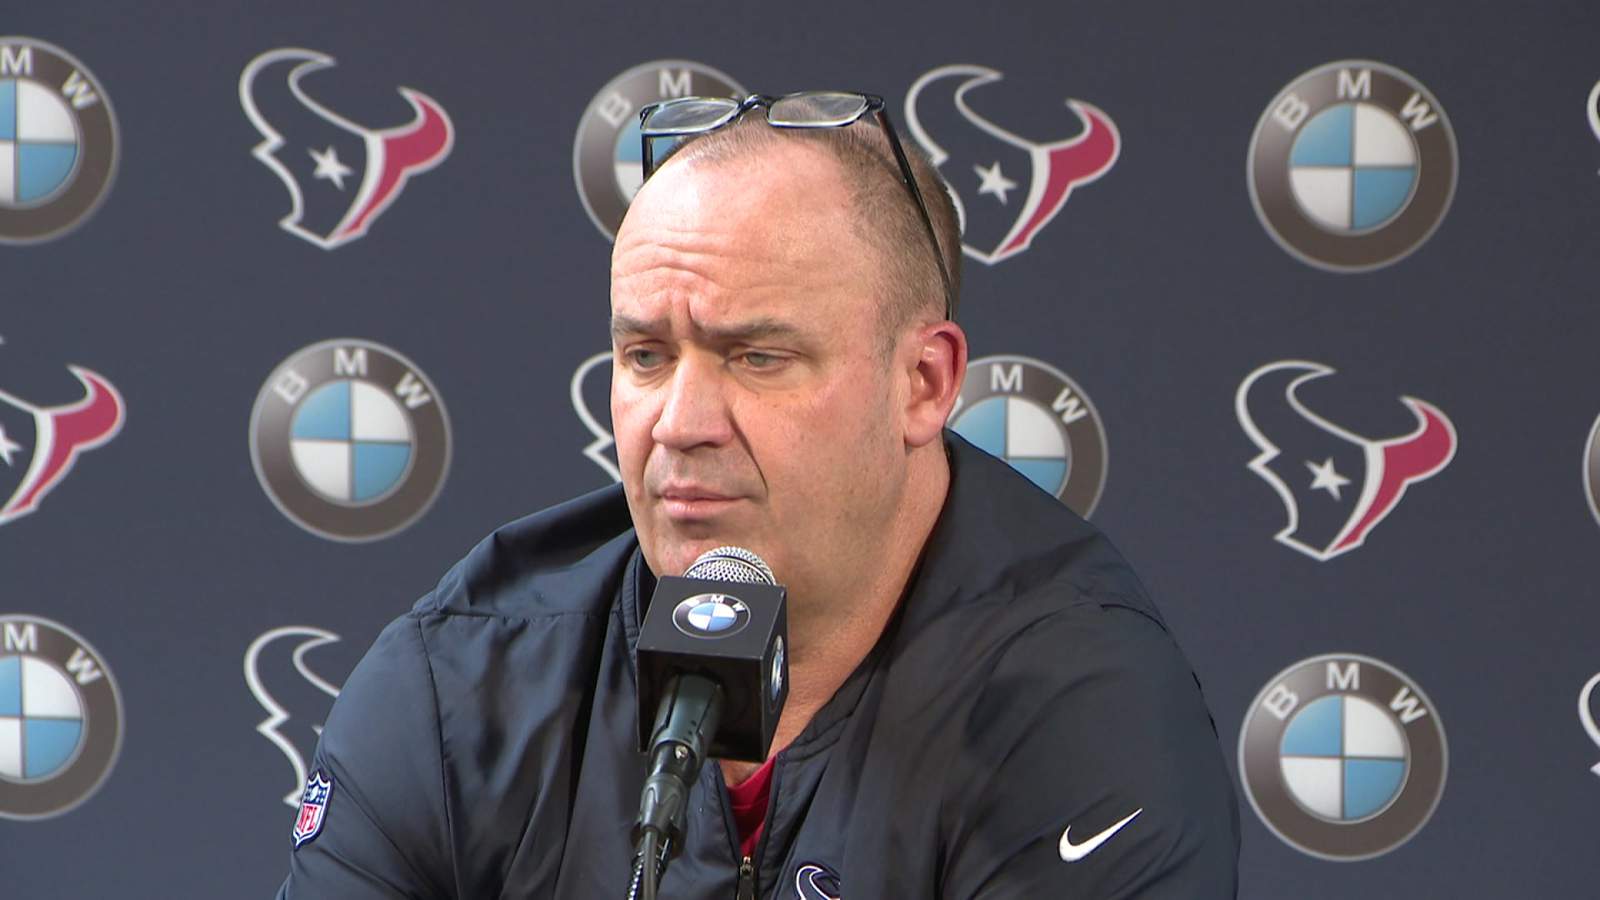 What Bill O’Brien said during his press conference about the DeAndre Hopkins trade, the NFL Draft and operating virtually